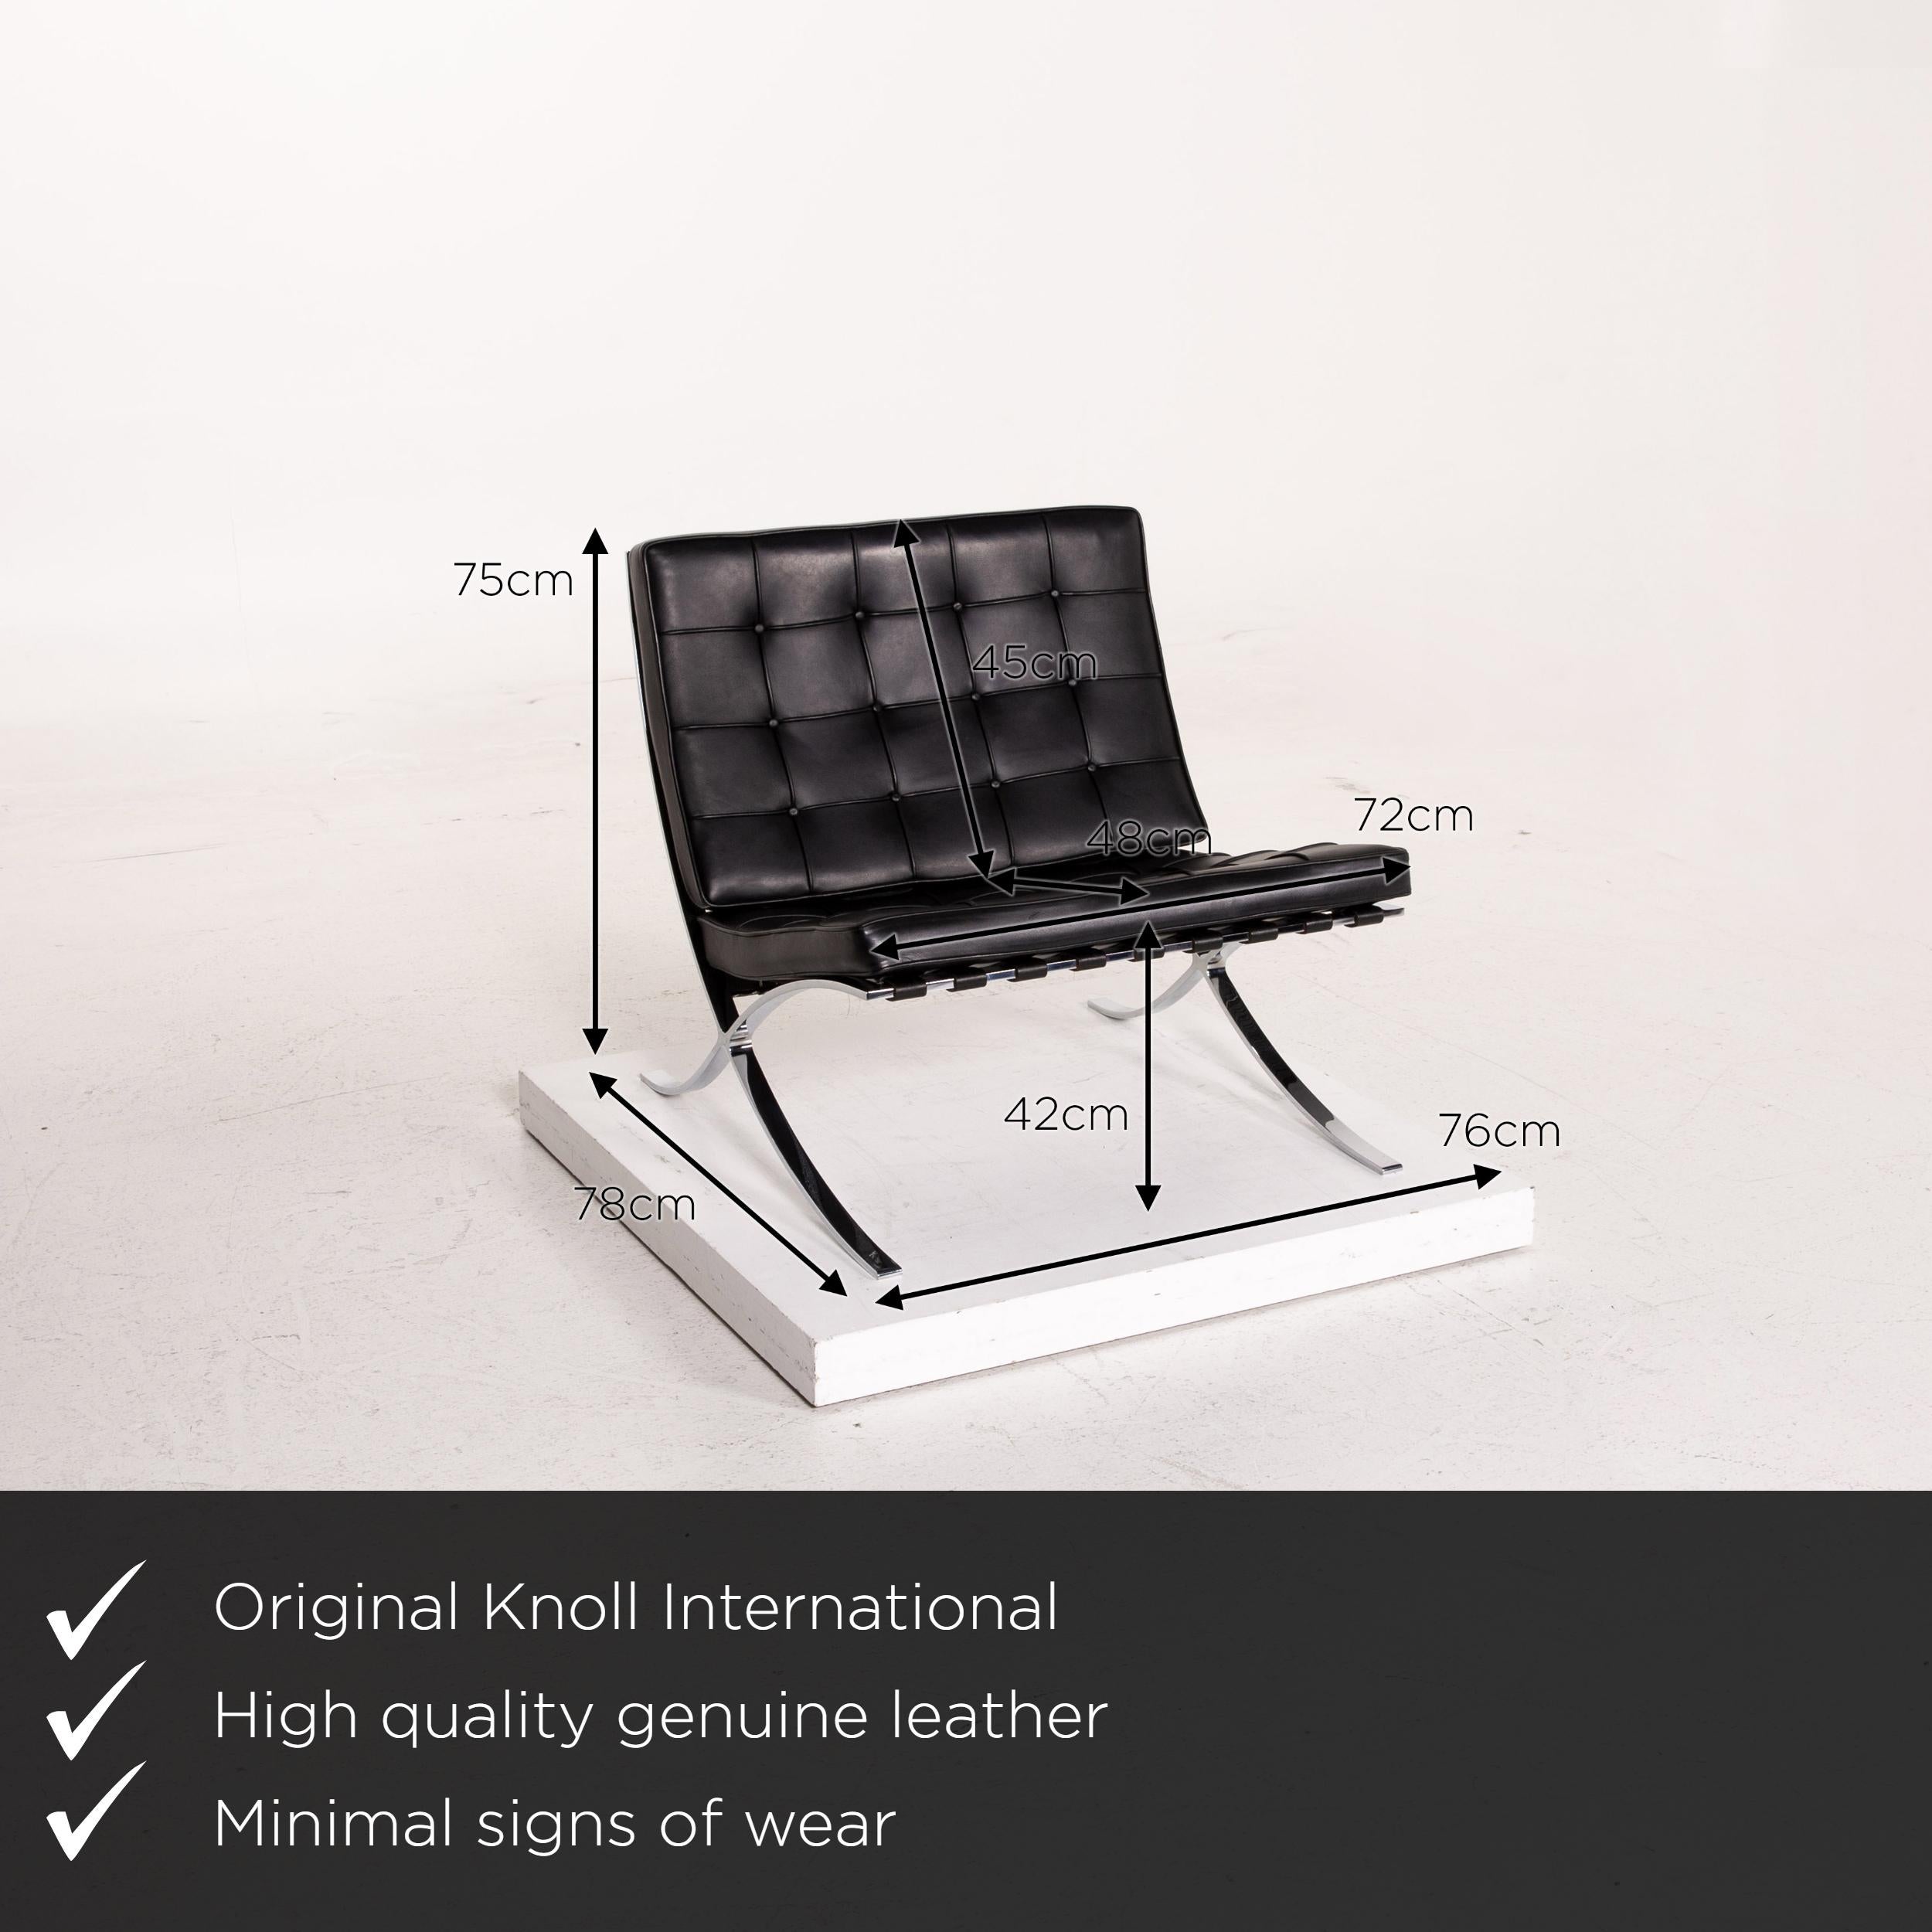 We present to you a Knoll International Barcelona chair leather armchair black
 

 Product measurements in centimeters:
 

Depth 78
Width 76
Height 75
Seat height 42
Seat depth 48
Seat width 72
Back height 45.
 
 